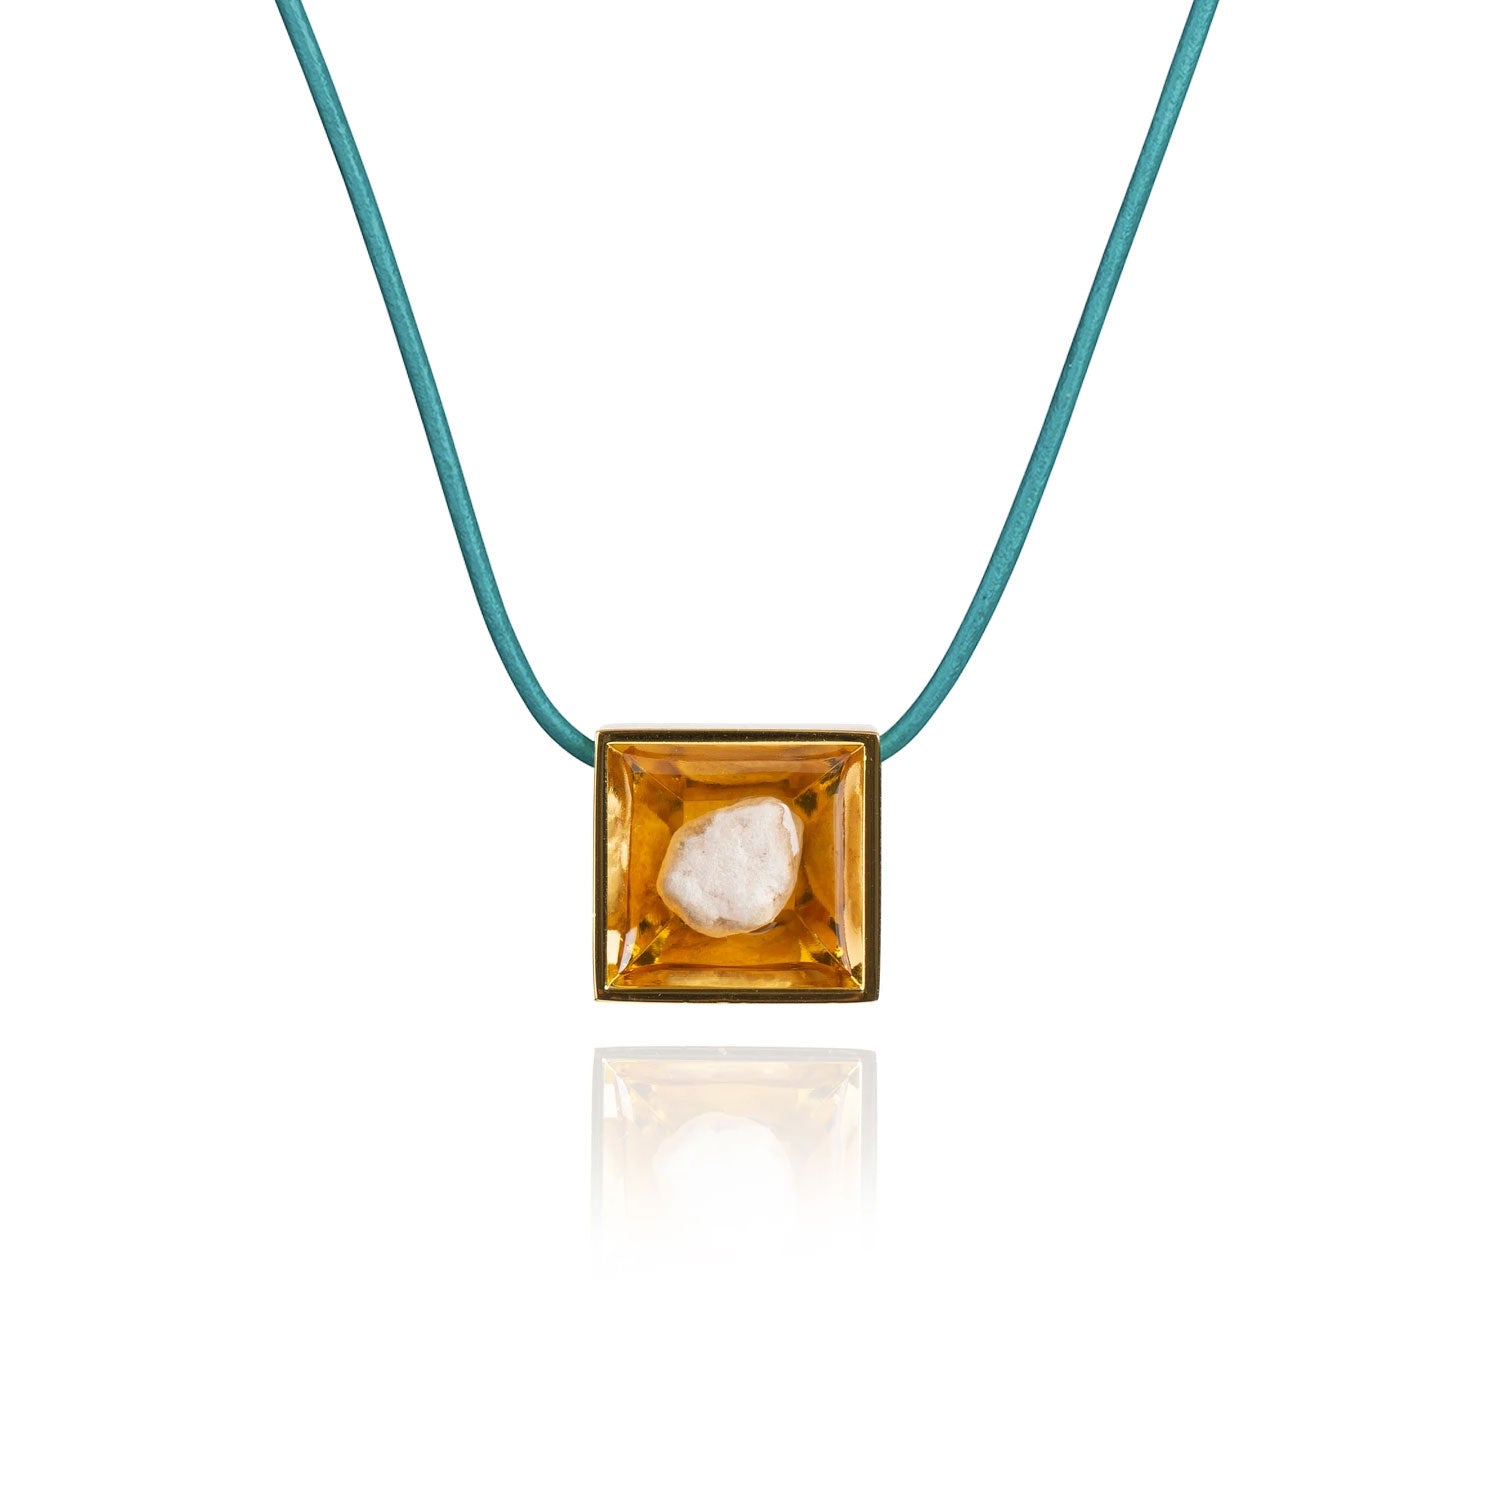 A small natural tan stone sitting in the middle of a square shaped metal pendant in a gold color. The pendant is hanging on a turquoise leather necklace.